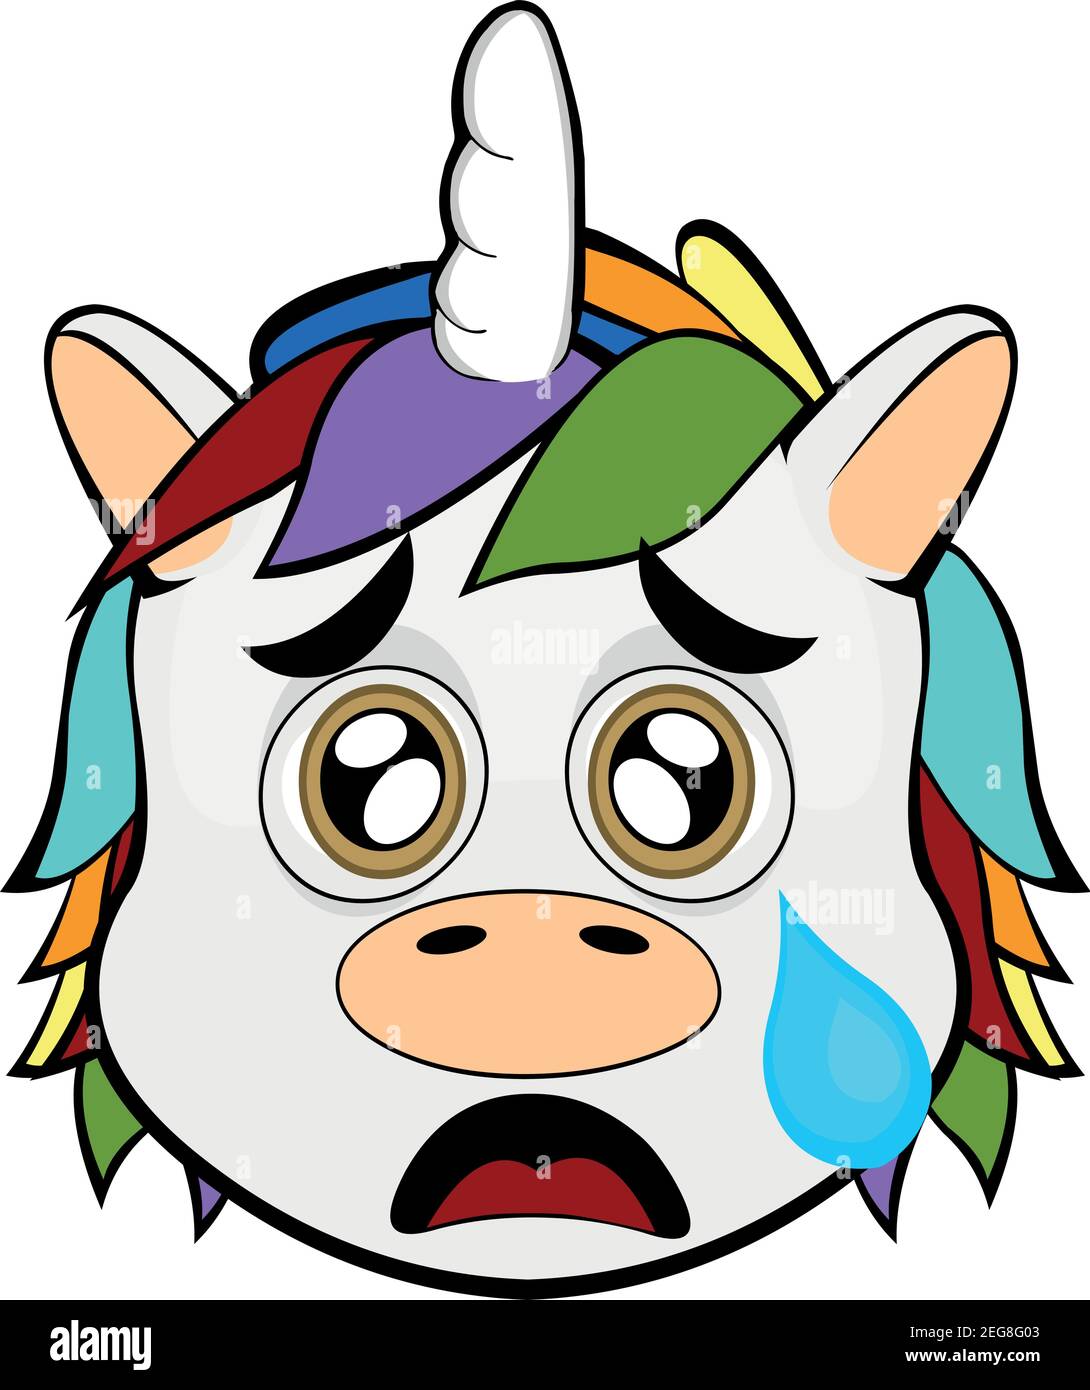 Vector emoticon illustration cartoon of an unicorn´s head with a sad expression and crying with a tear falling from its eye over its cheek Stock Vector